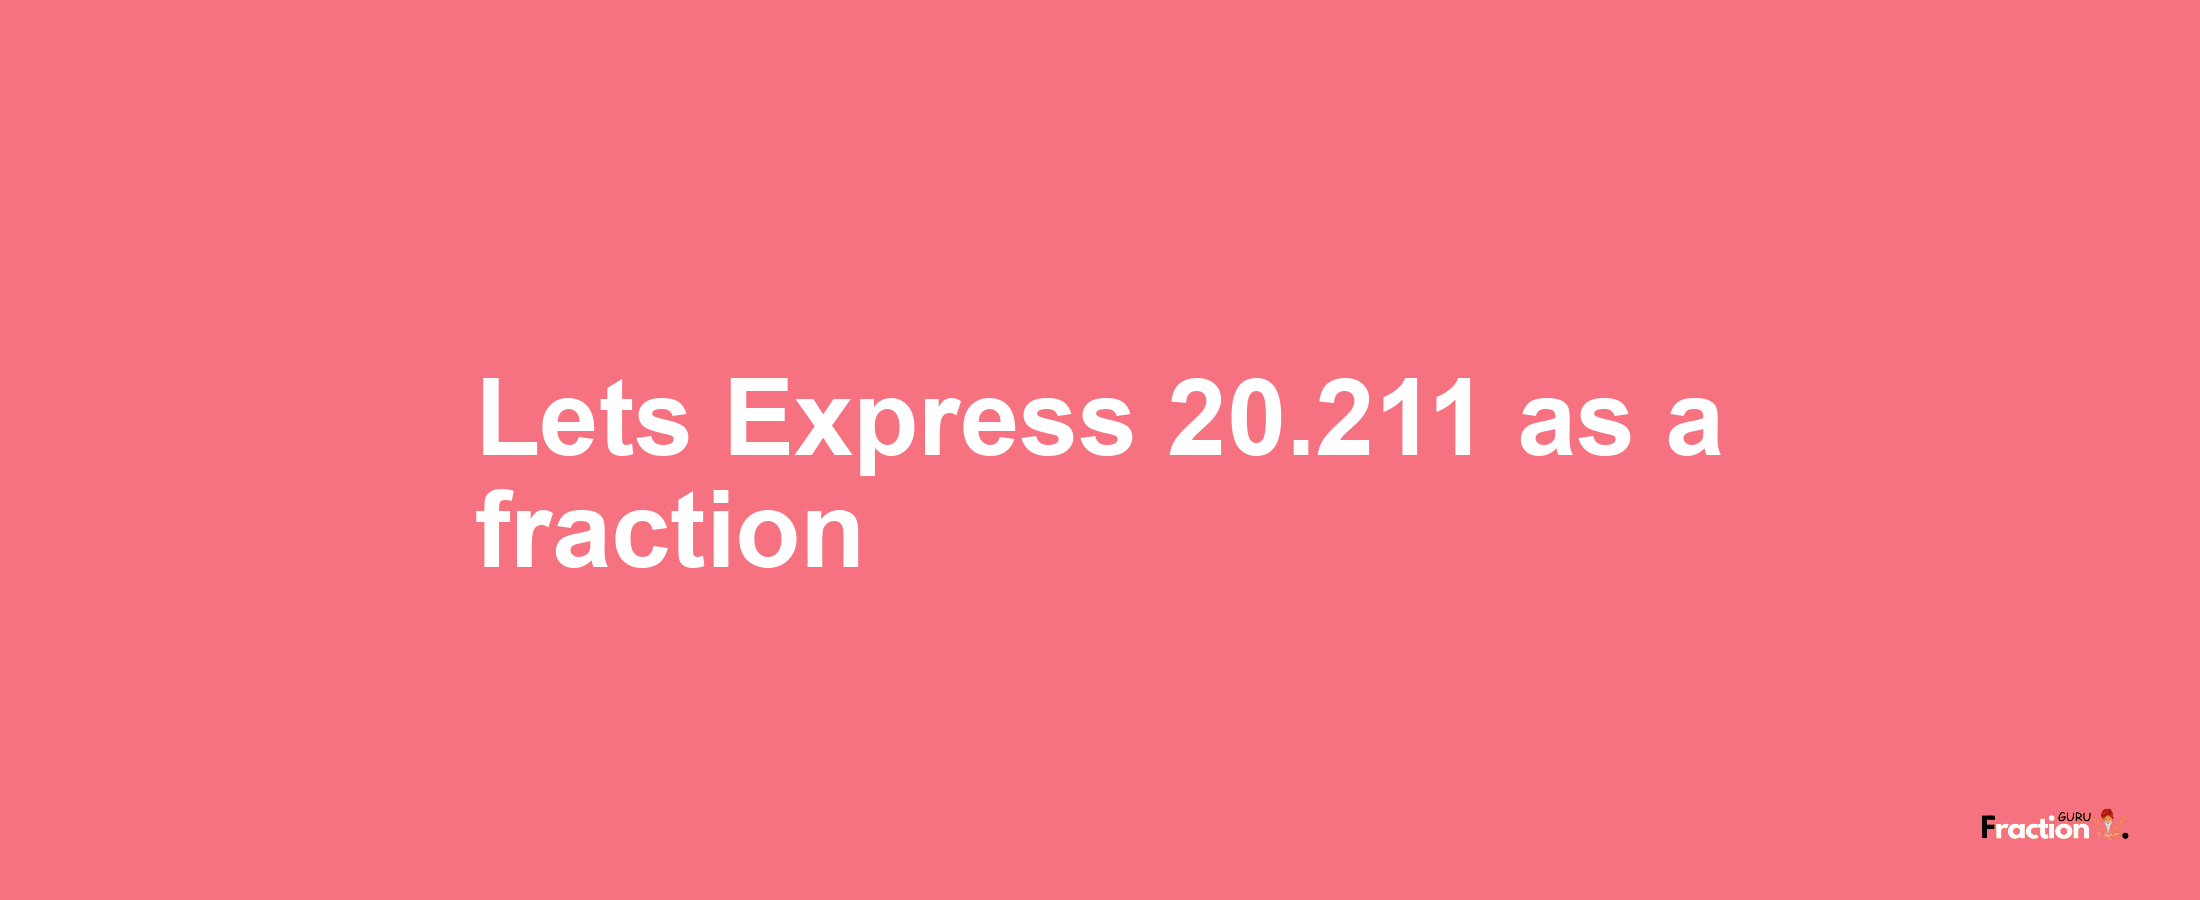 Lets Express 20.211 as afraction